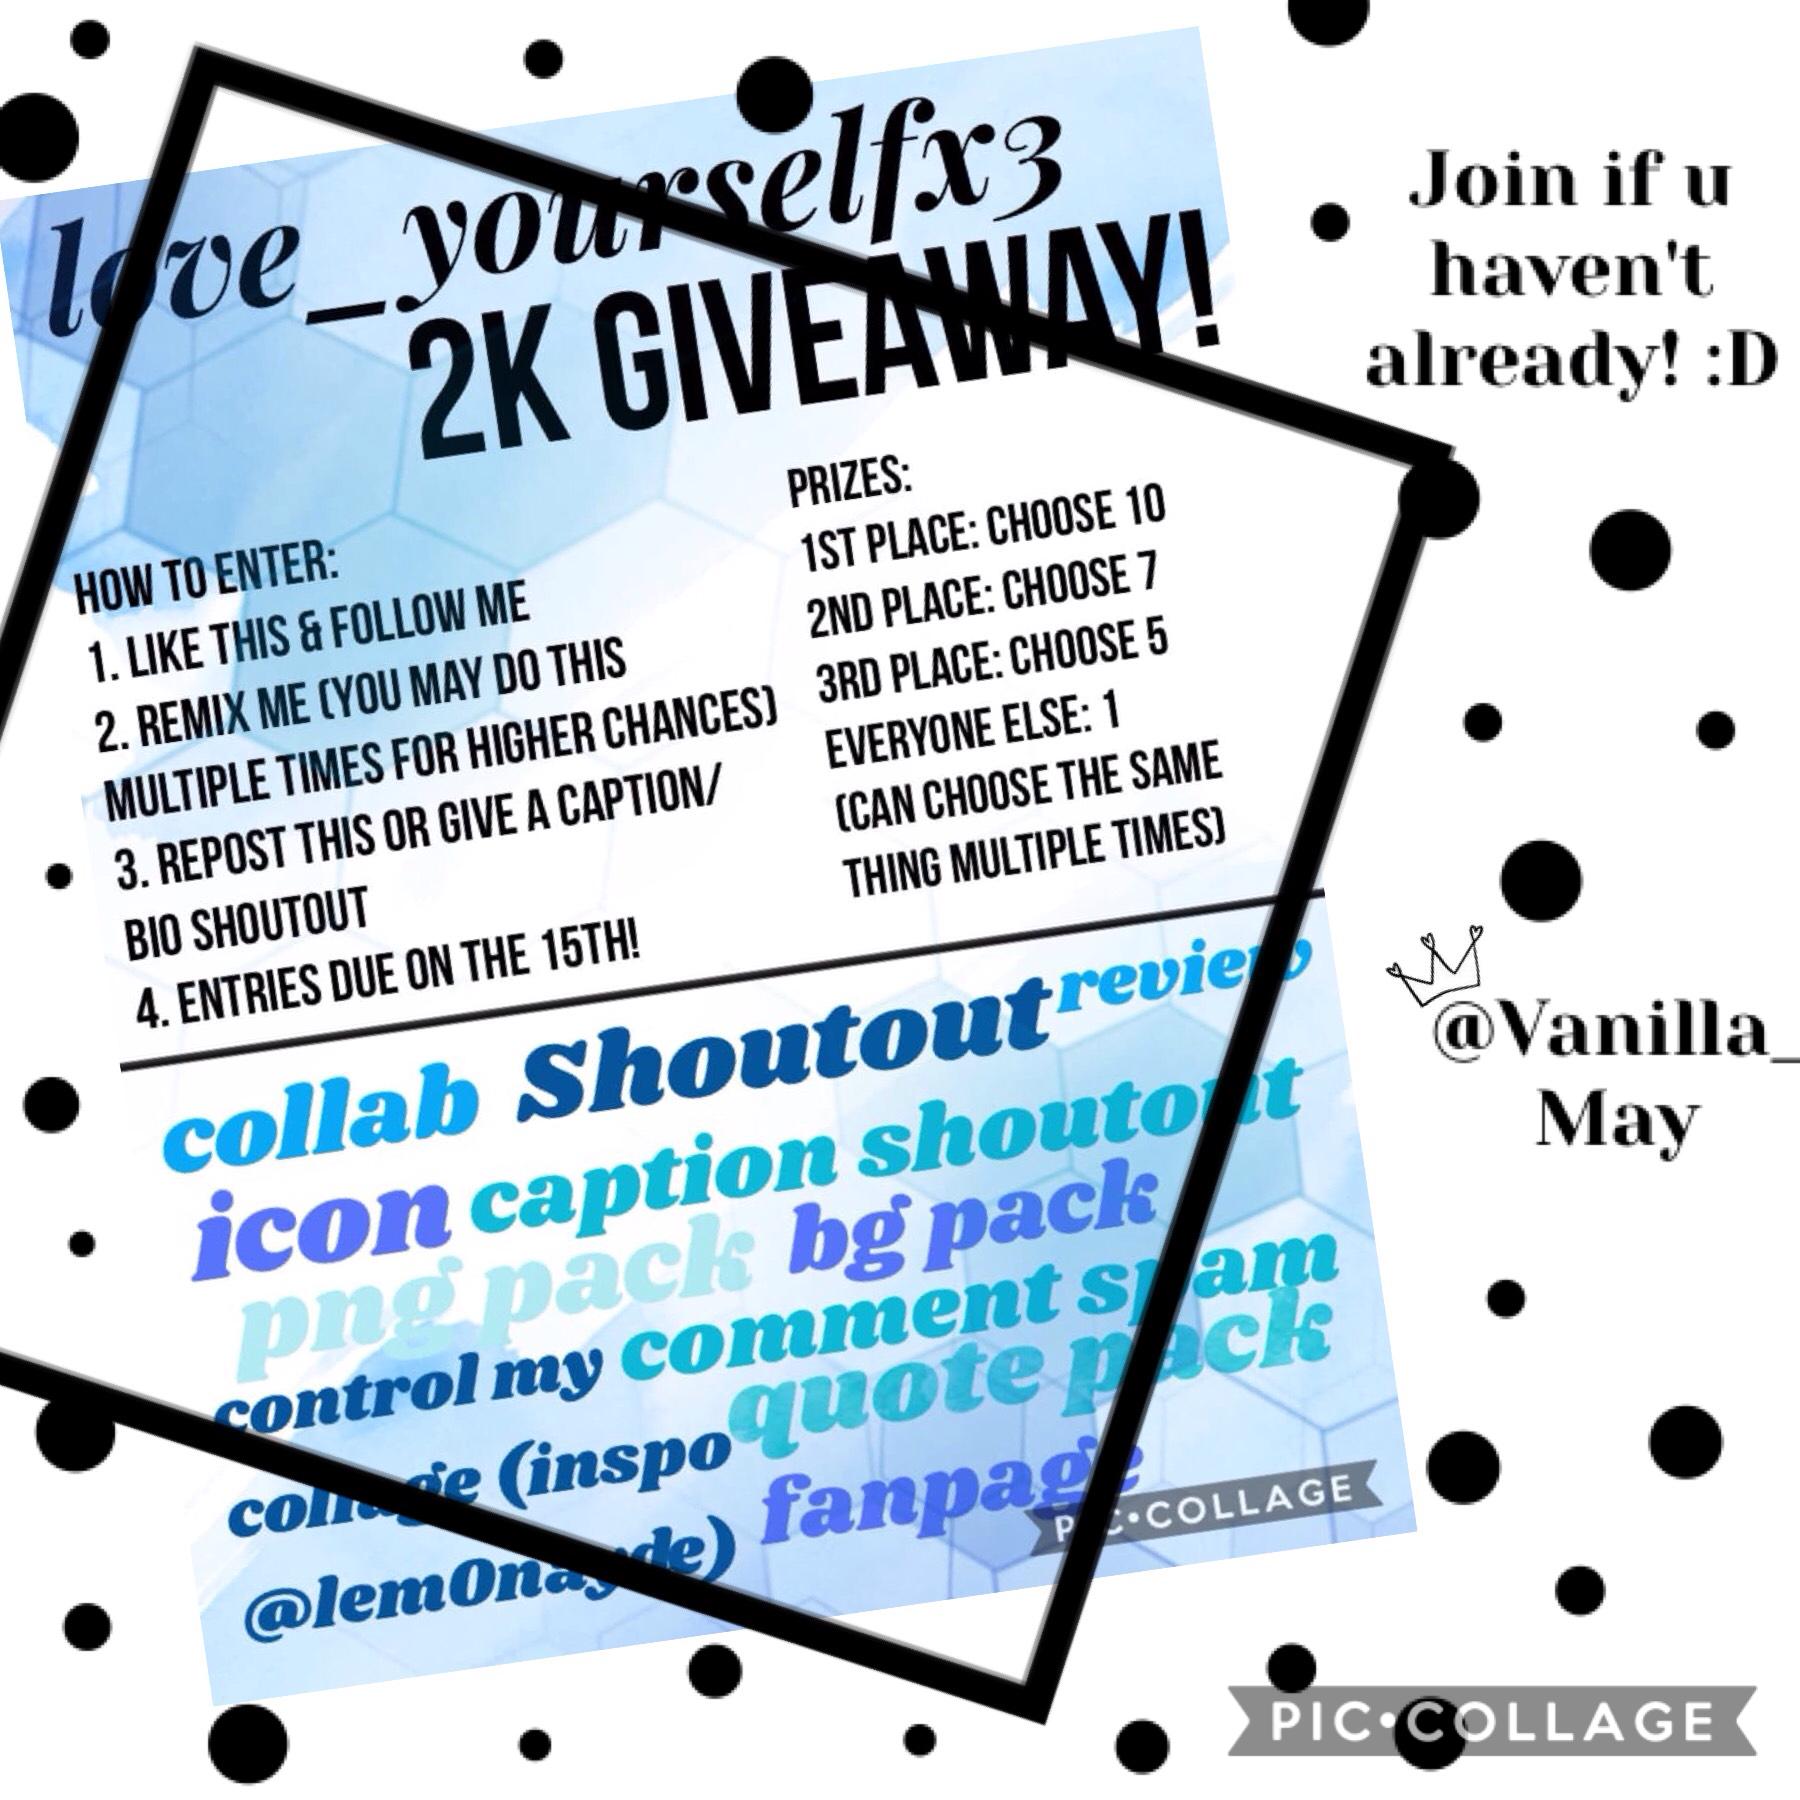 Repost of love_yourselfx3's 2K giveaway | if u haven't joined already then do! U won't regret it! ~and ya idk what to post after this....